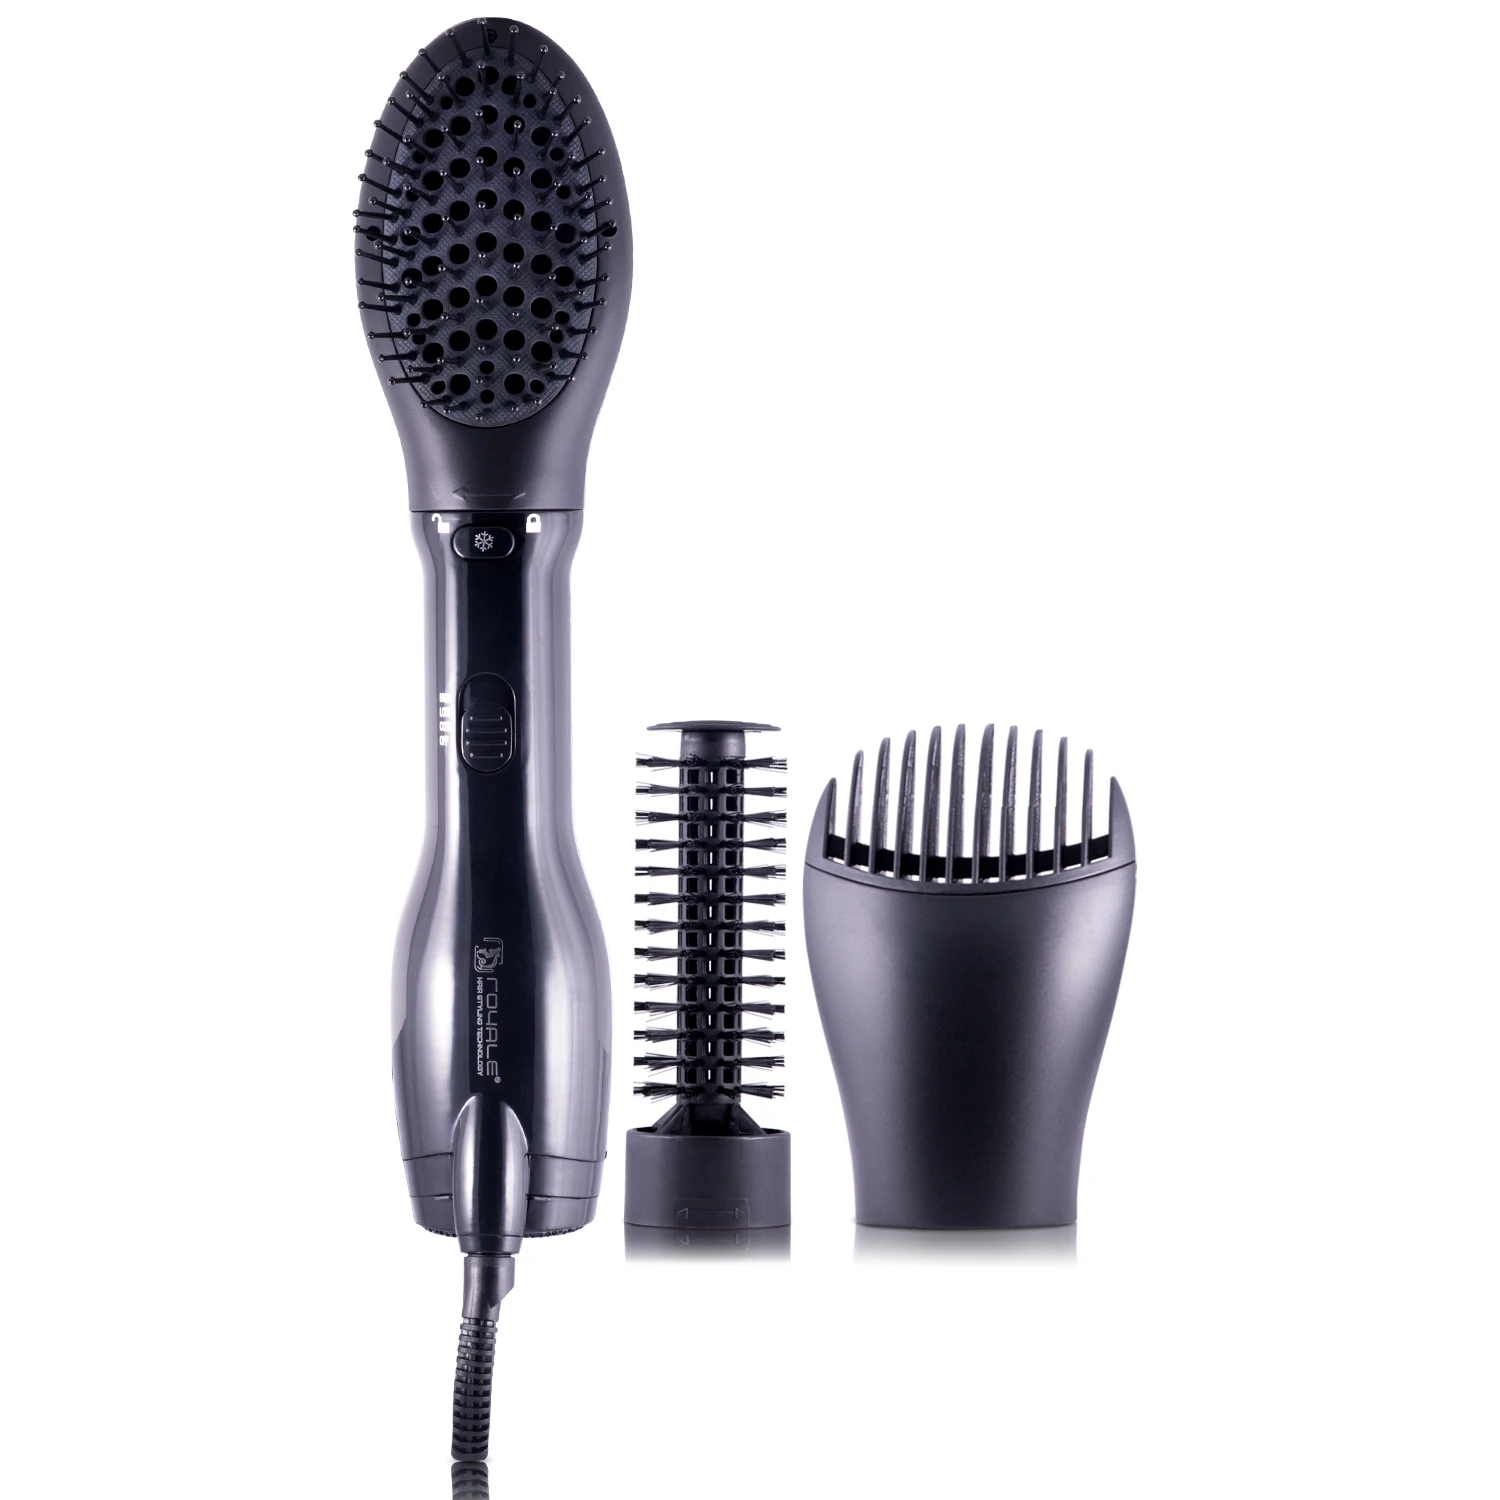 Image of 4-in-1 Interchangeable Blower Brush Set with Volumizing, Straightening, and Curling Attachments